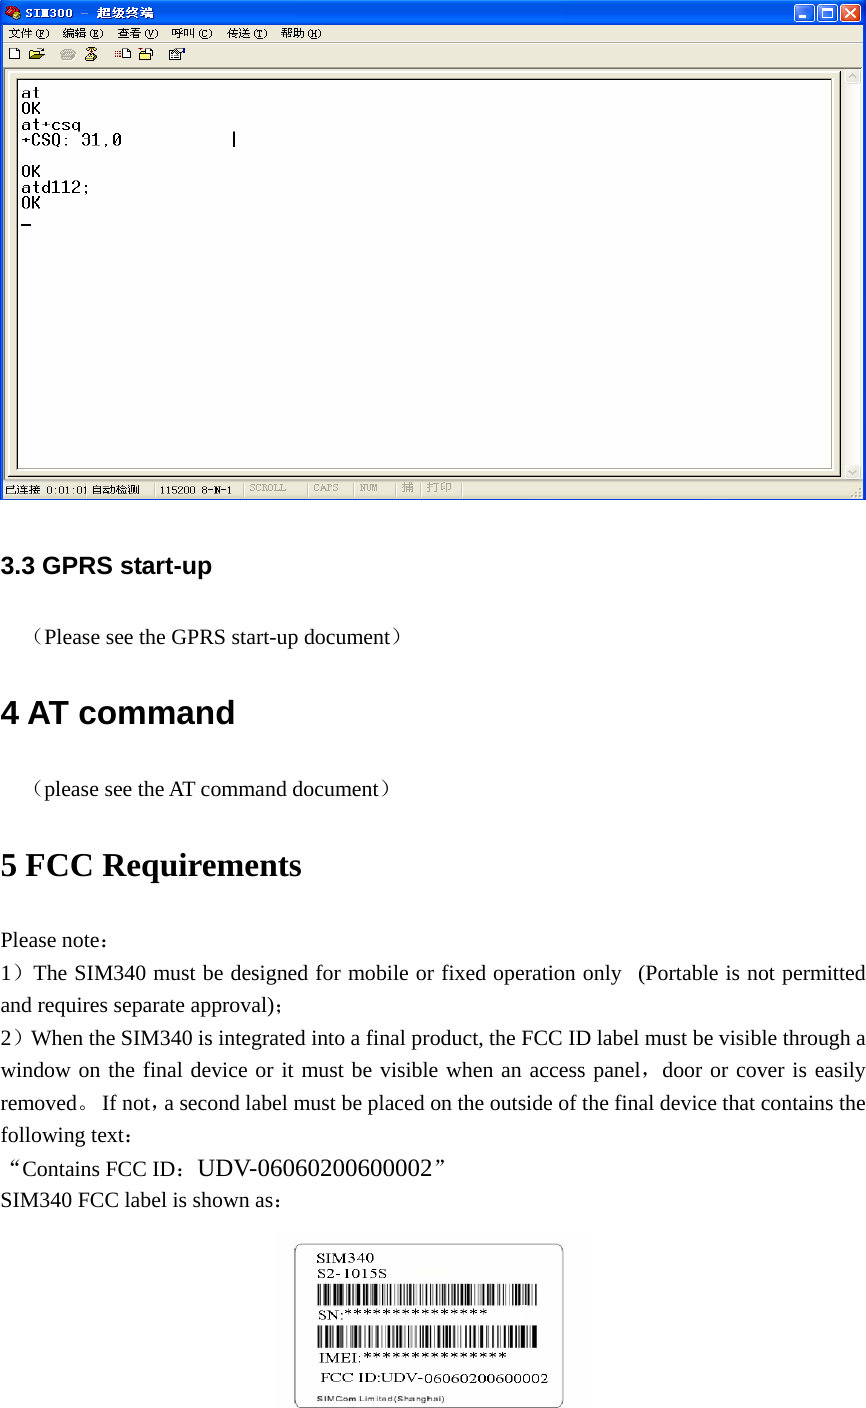  3.3 GPRS start-up （Please see the GPRS start-up document） 4 AT command （please see the AT command document） 5 FCC Requirements Please note： 1）The SIM340 must be designed for mobile or fixed operation only   (Portable is not permitted and requires separate approval)； 2）When the SIM340 is integrated into a final product, the FCC ID label must be visible through a window on the final device or it must be visible when an access panel，door or cover is easily removed。 If not，a second label must be placed on the outside of the final device that contains the following text： “Contains FCC ID：UDV-06060200600002” SIM340 FCC label is shown as：  